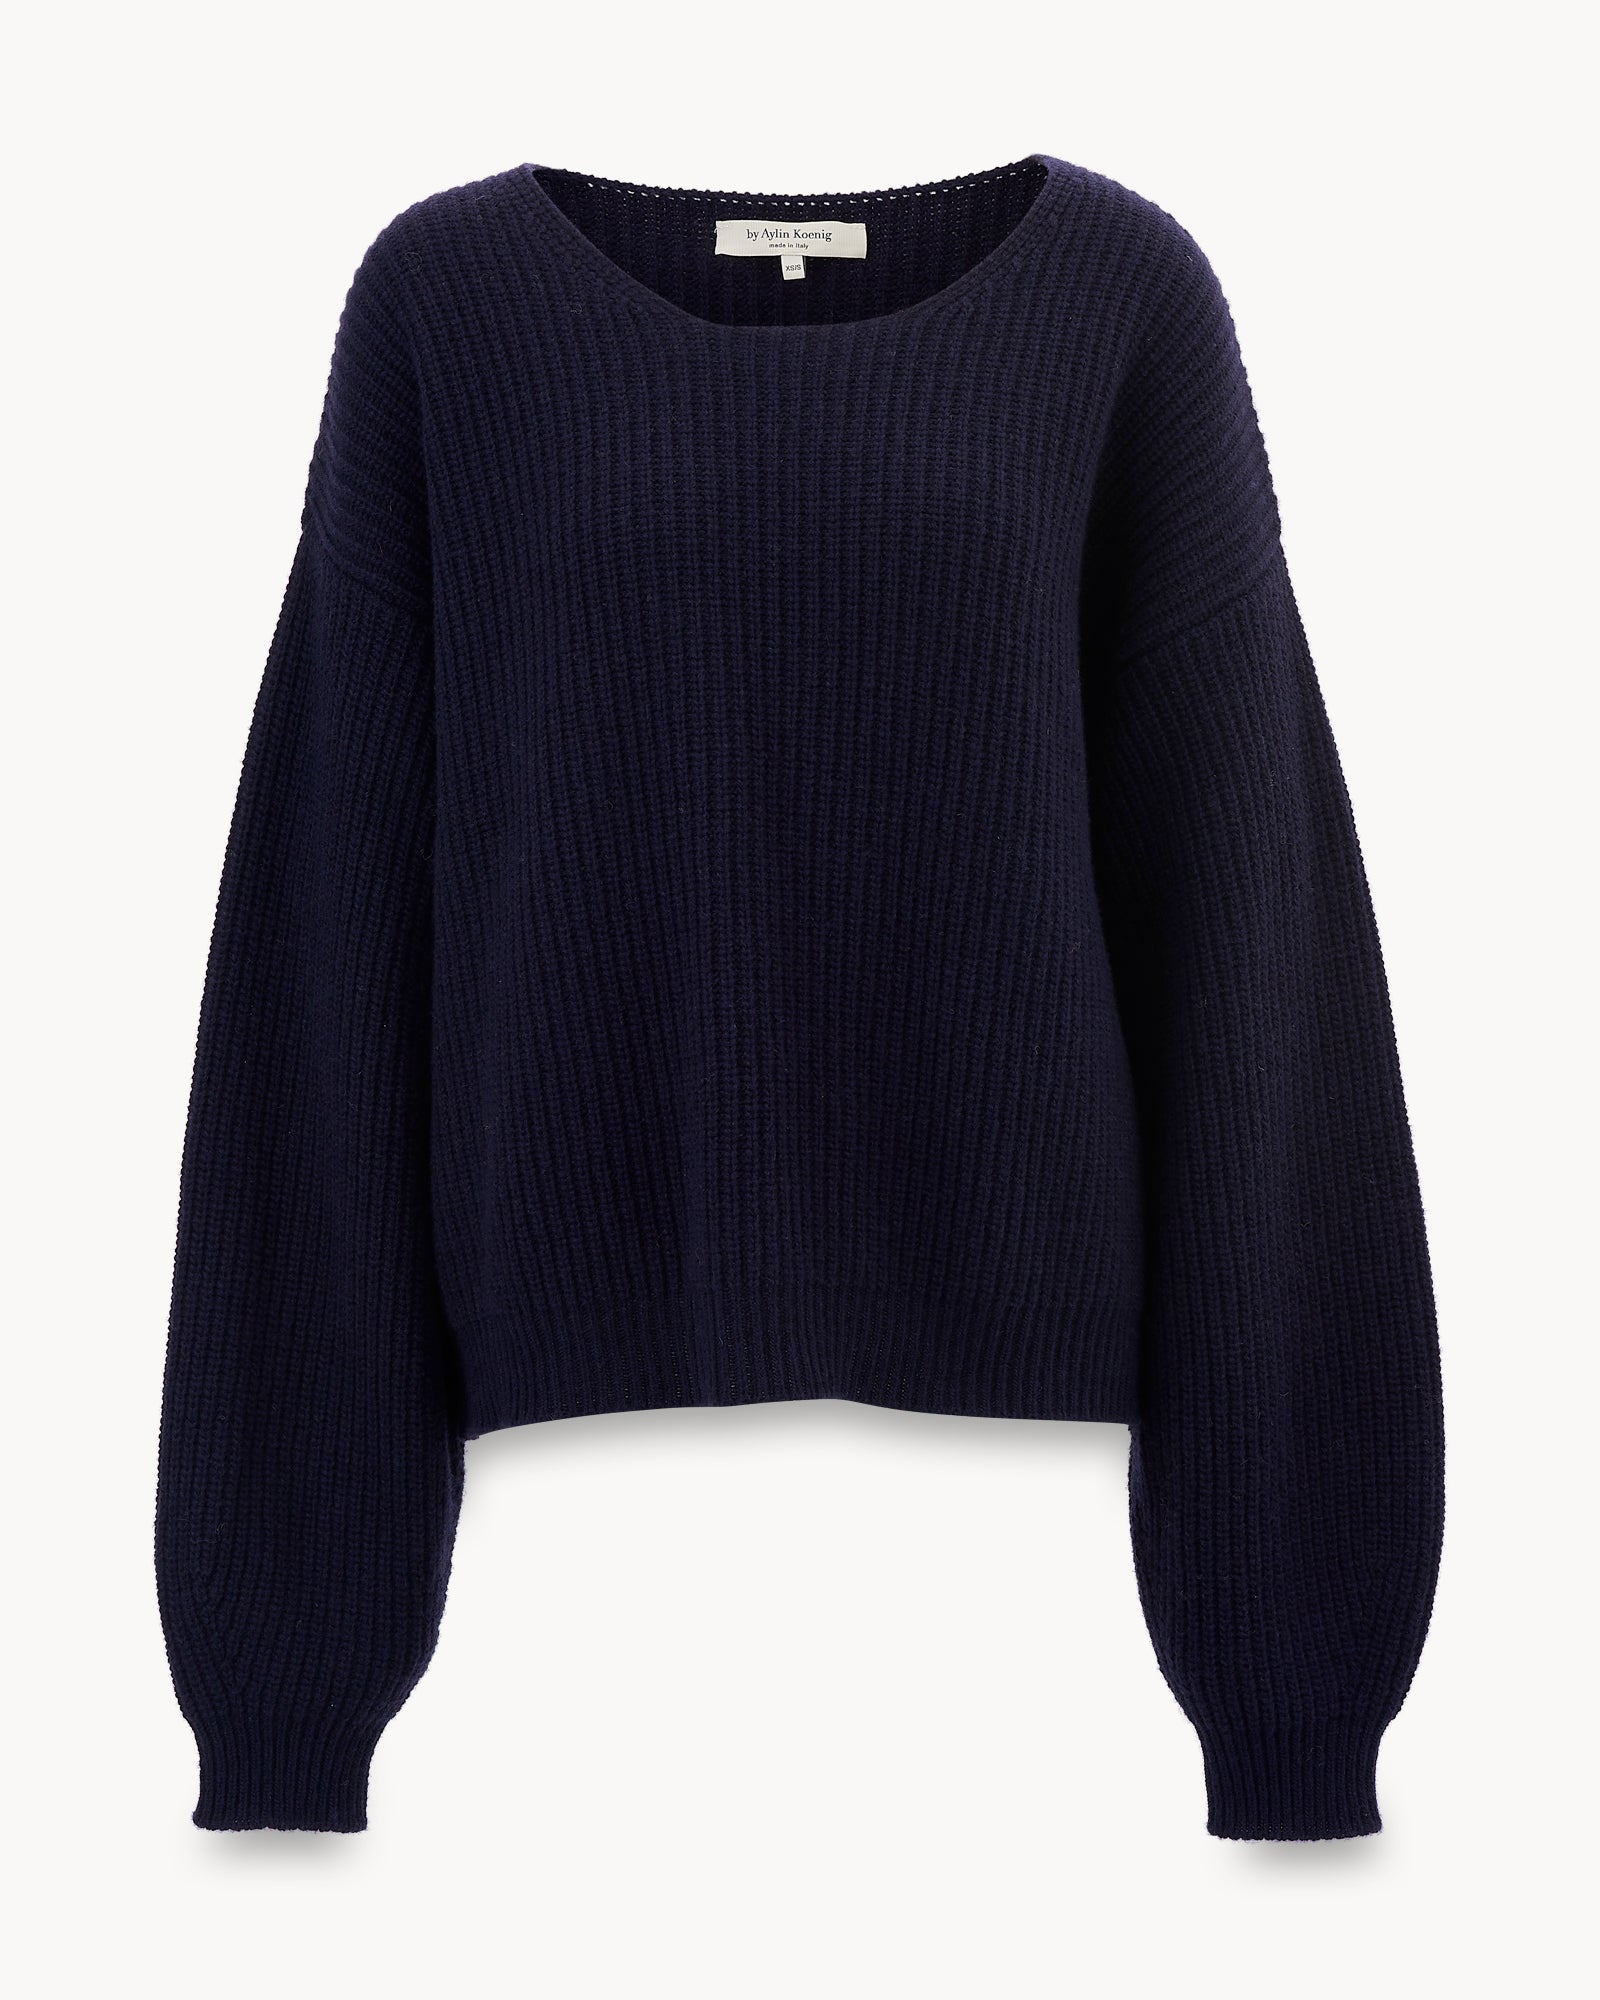 Pullover LOU (navy)